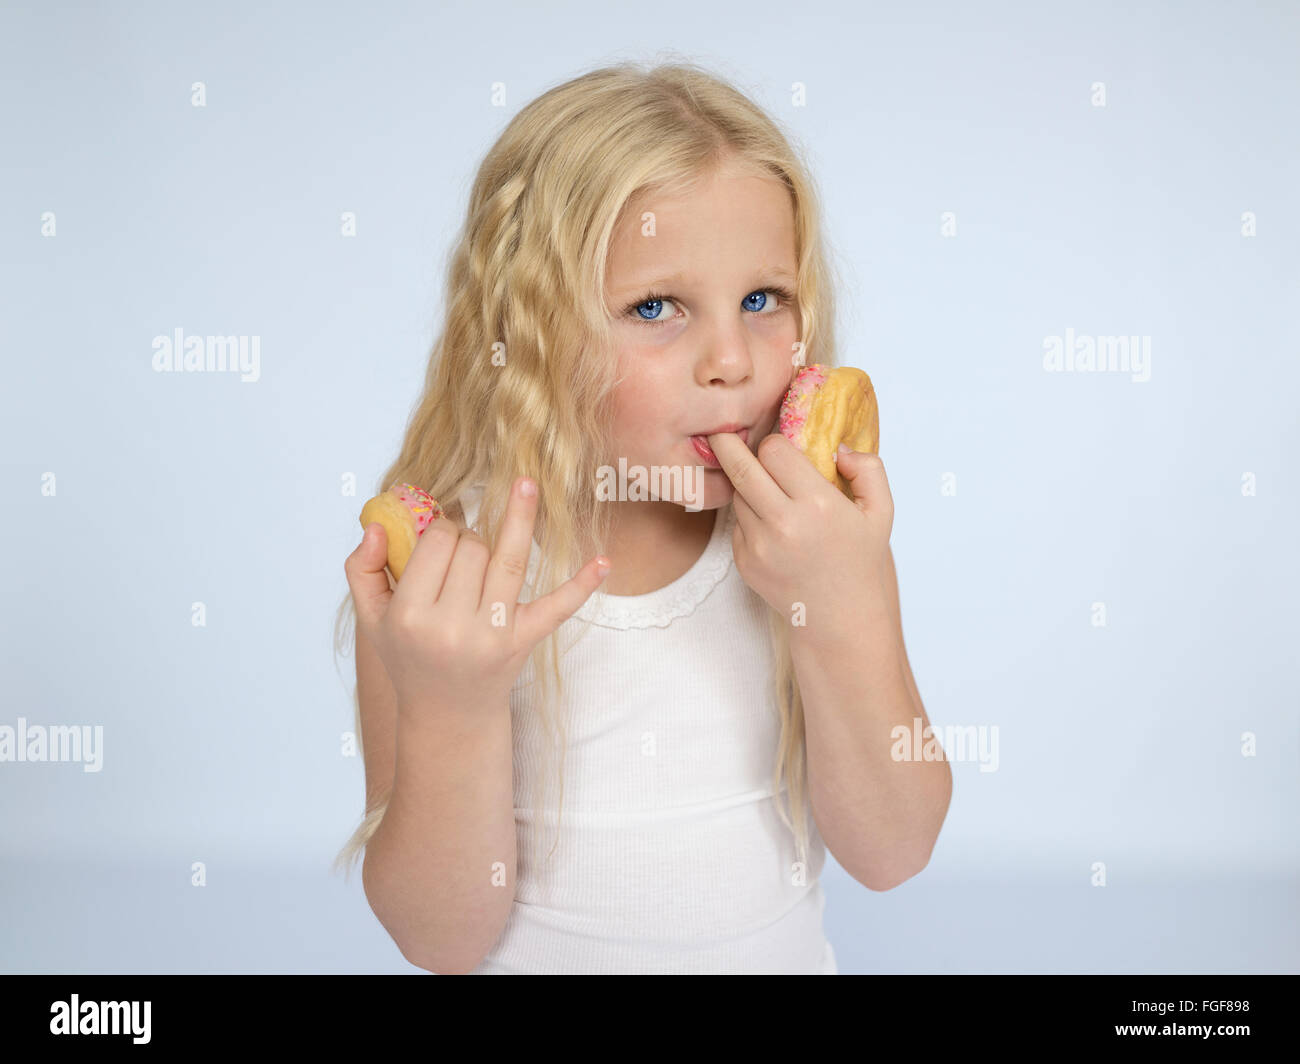 Young girl with long blonde hair eating donuts and licking her fingers Stock Photo